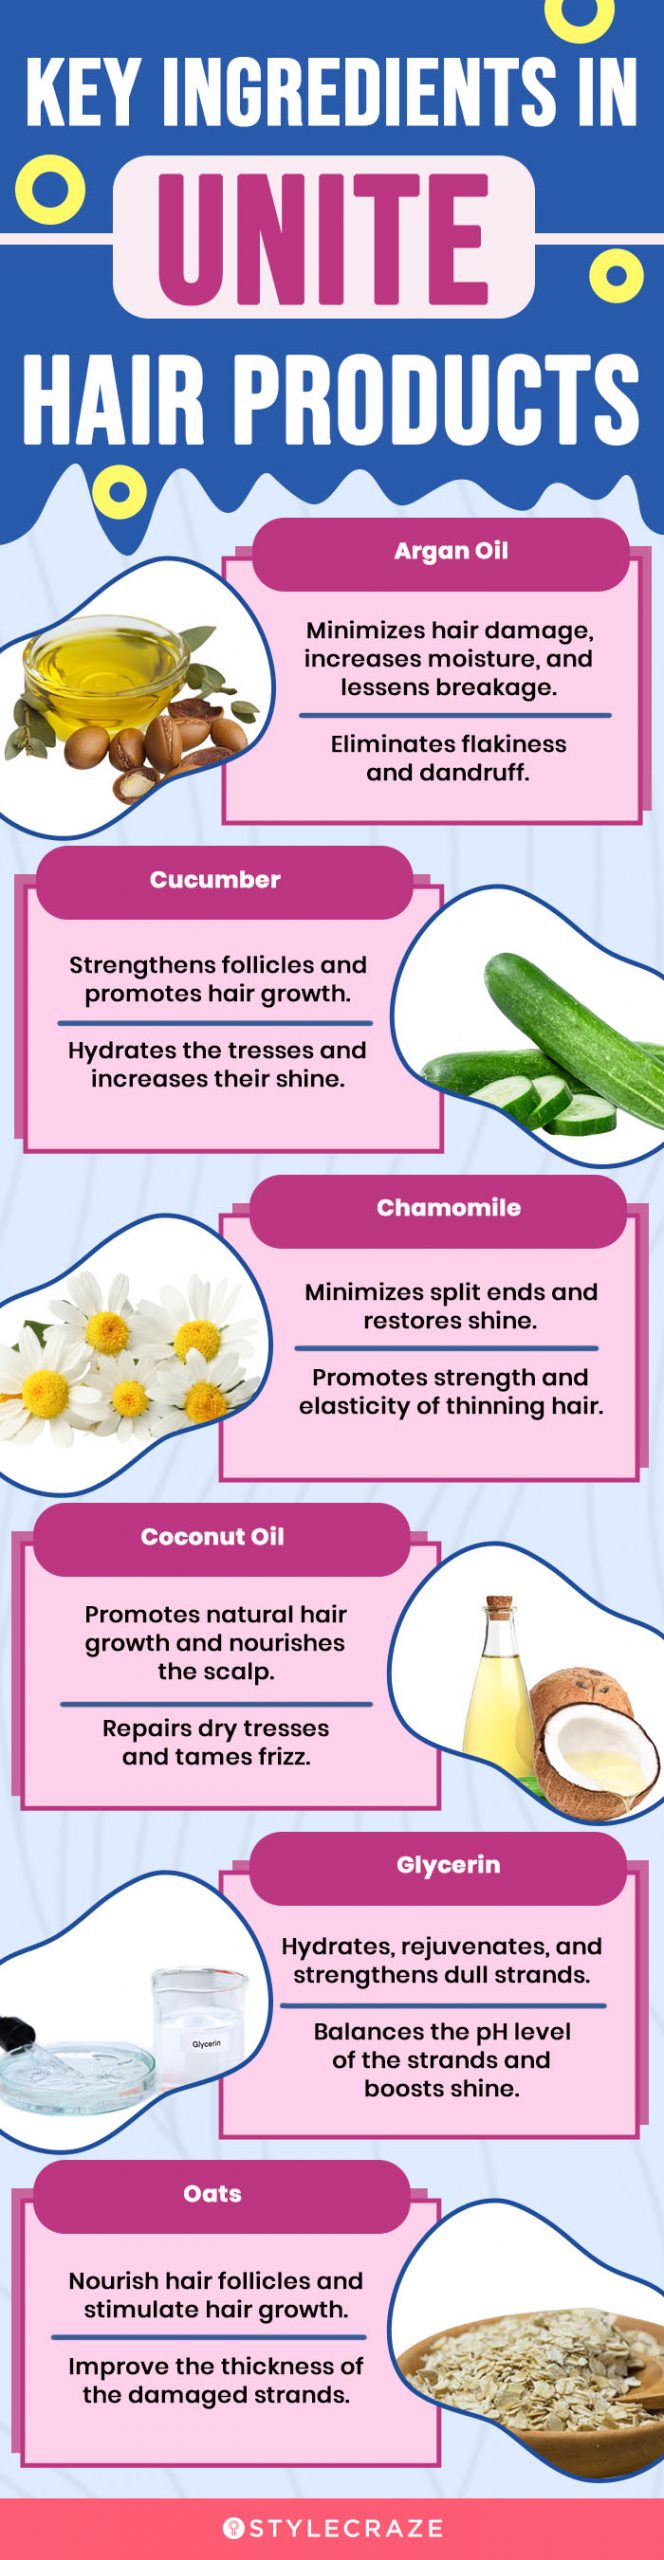 Key Ingredients In UNITE Hair Products (infographic)